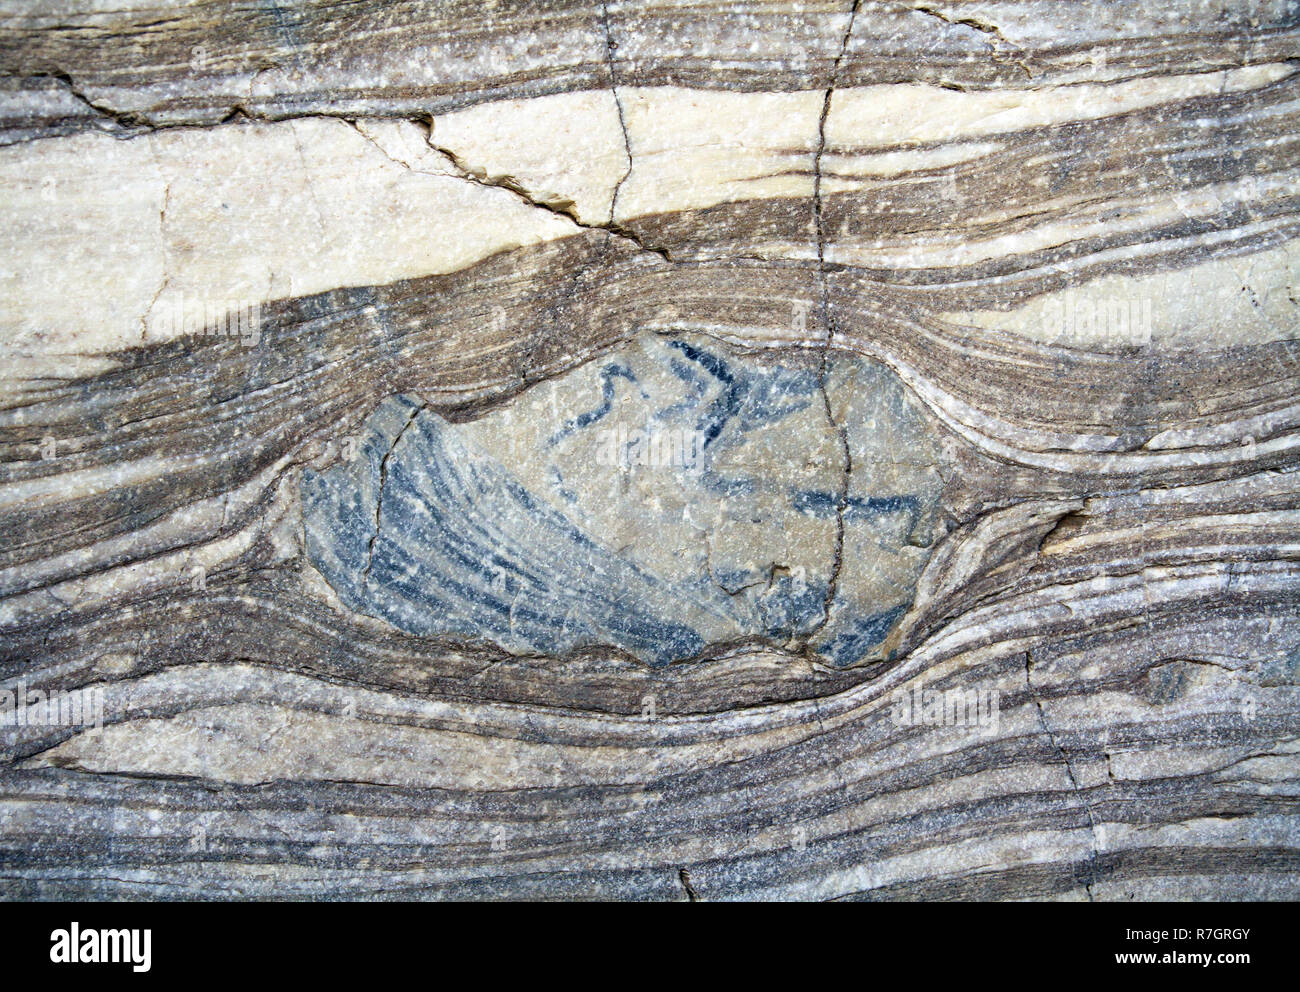 detail of concretion inside layered rock at Mosaic Canyon Stock Photo